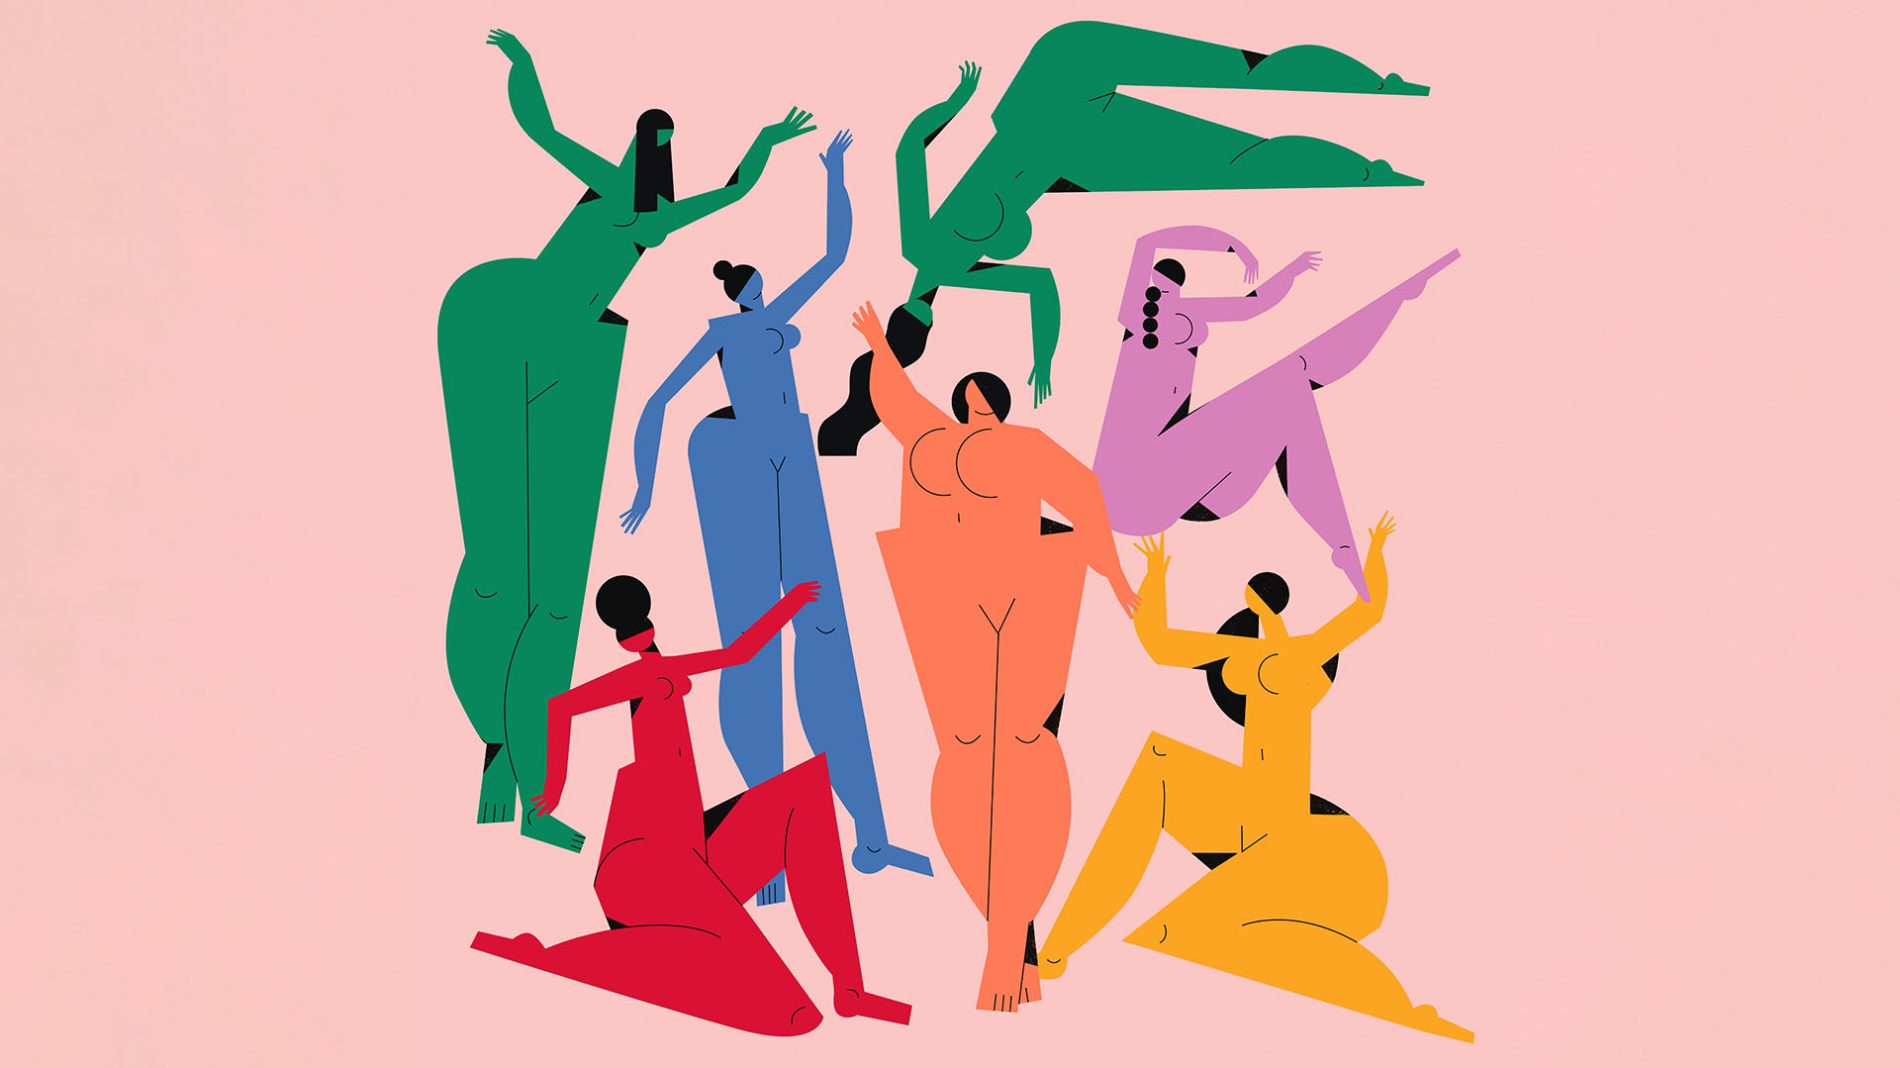 Illustration of people with different body shapes and colours - body positivity